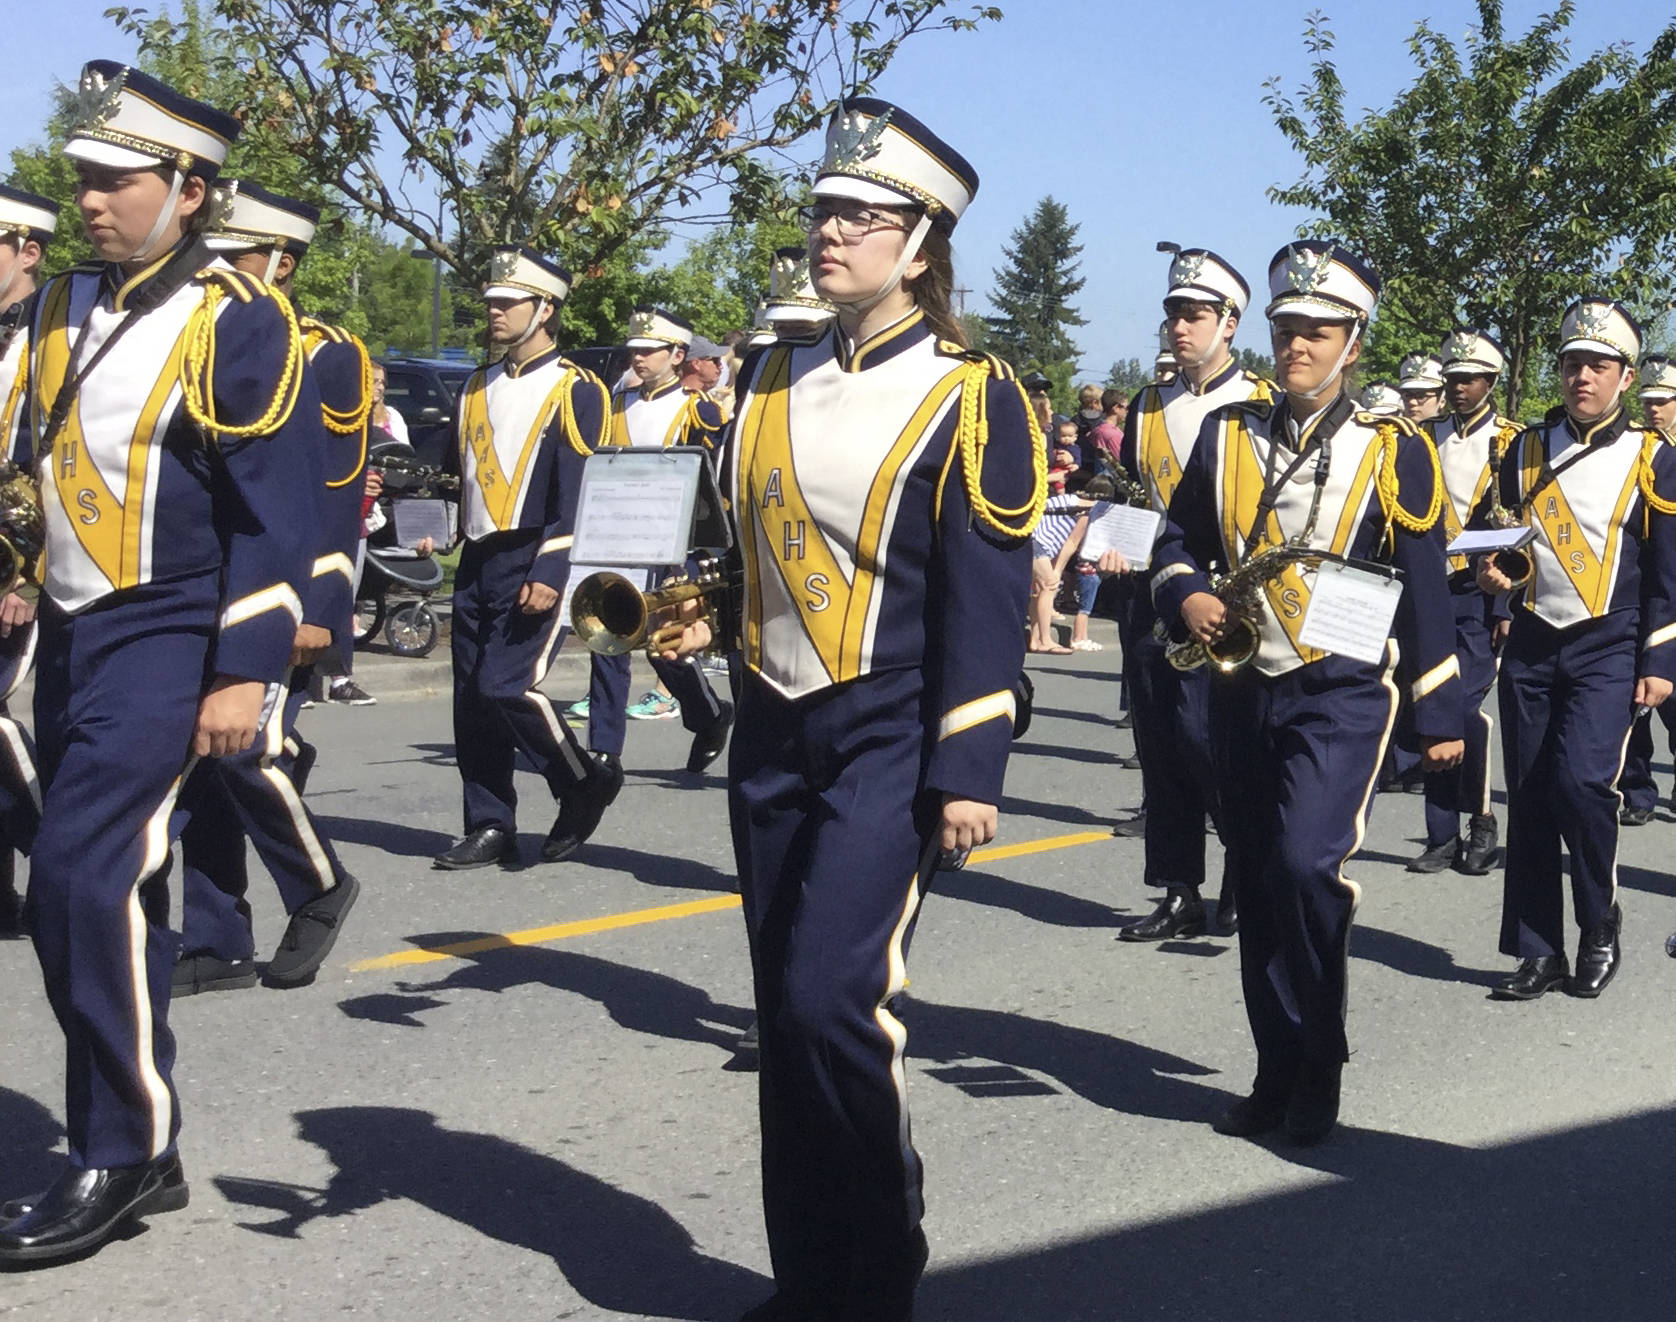 Join together with the band, celebrating new Arlington uniforms